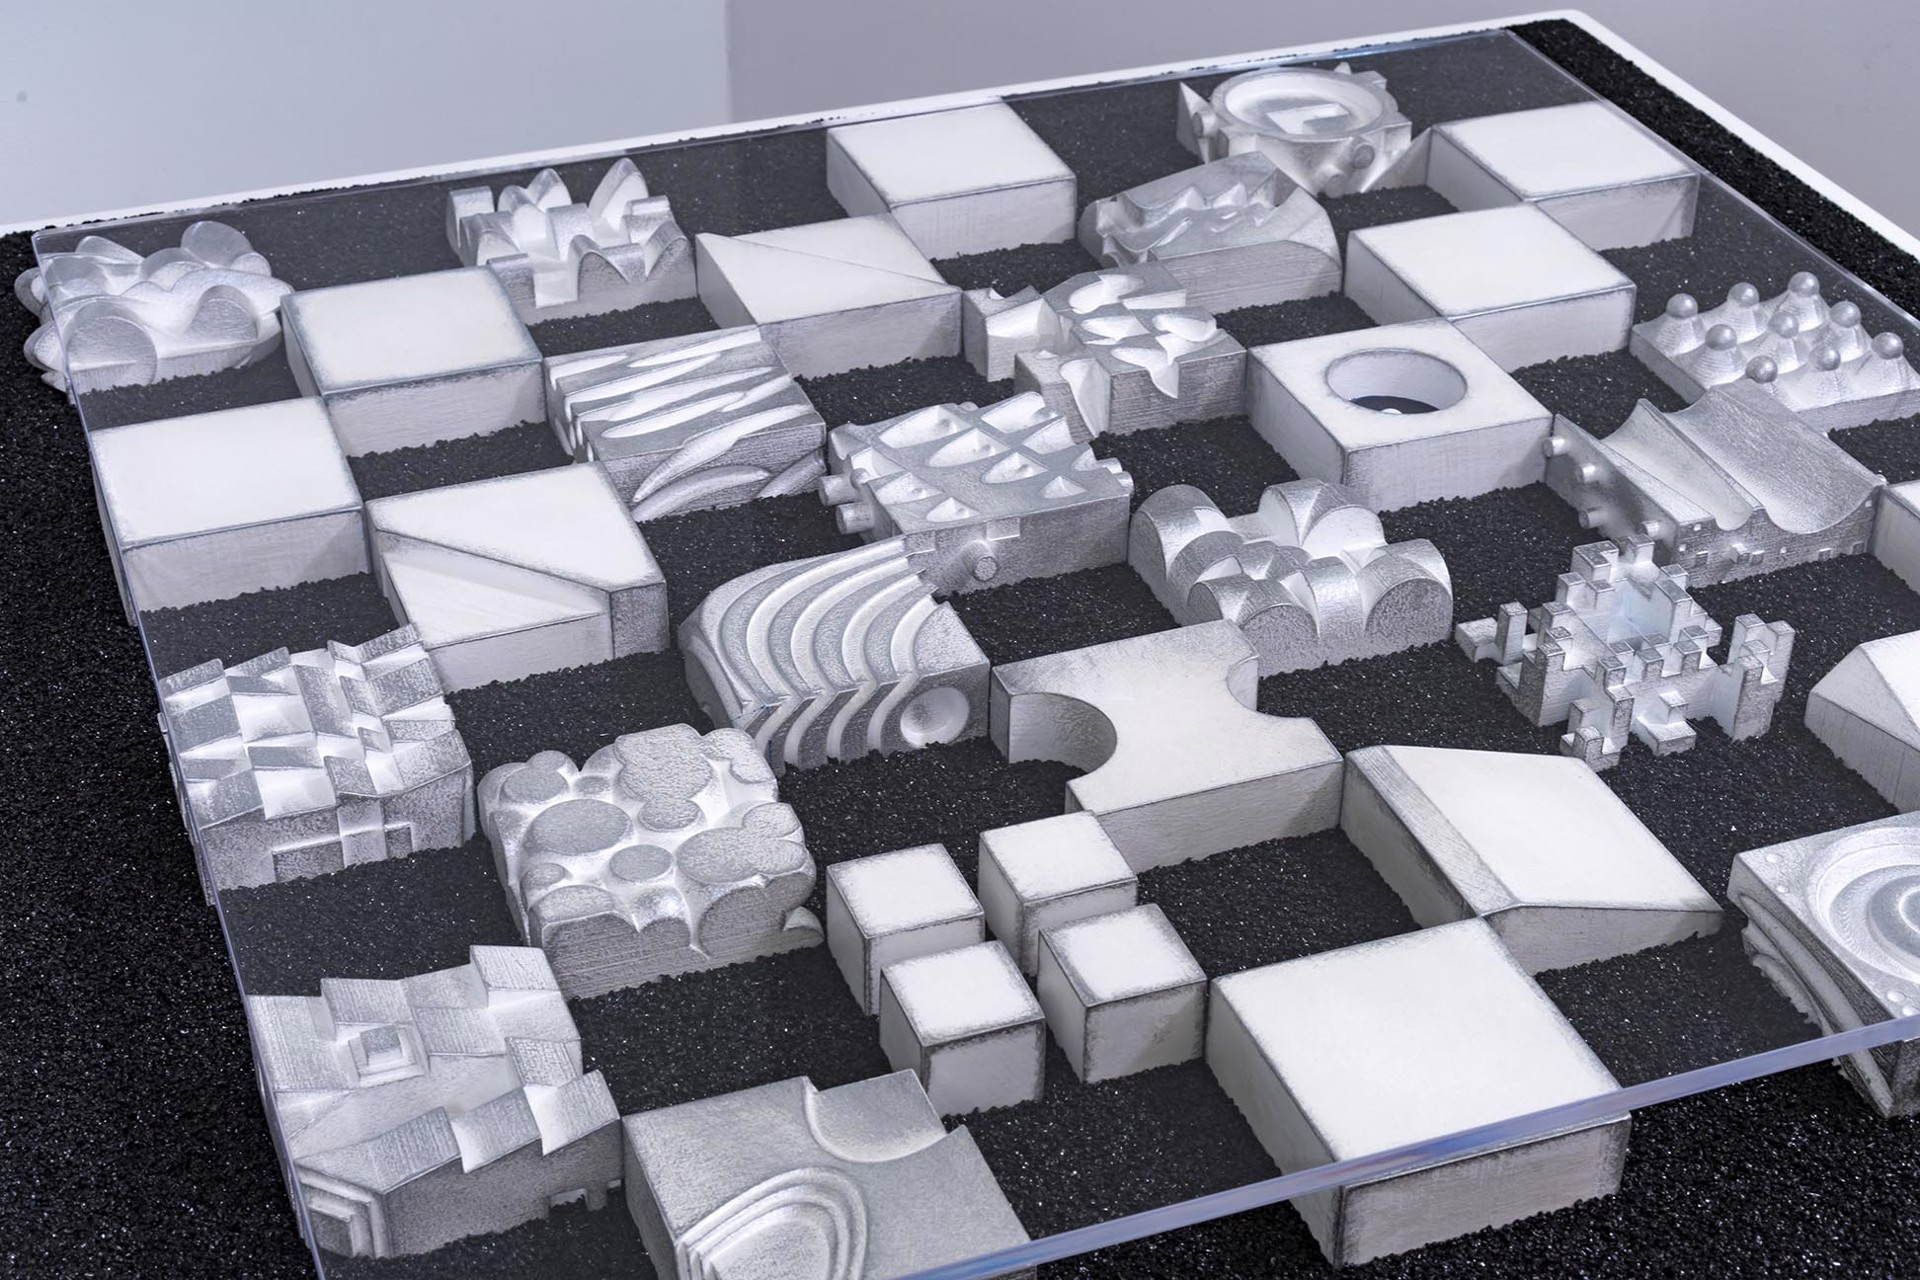 Checkmate (Lava Sand Board) by Gil Bruvel